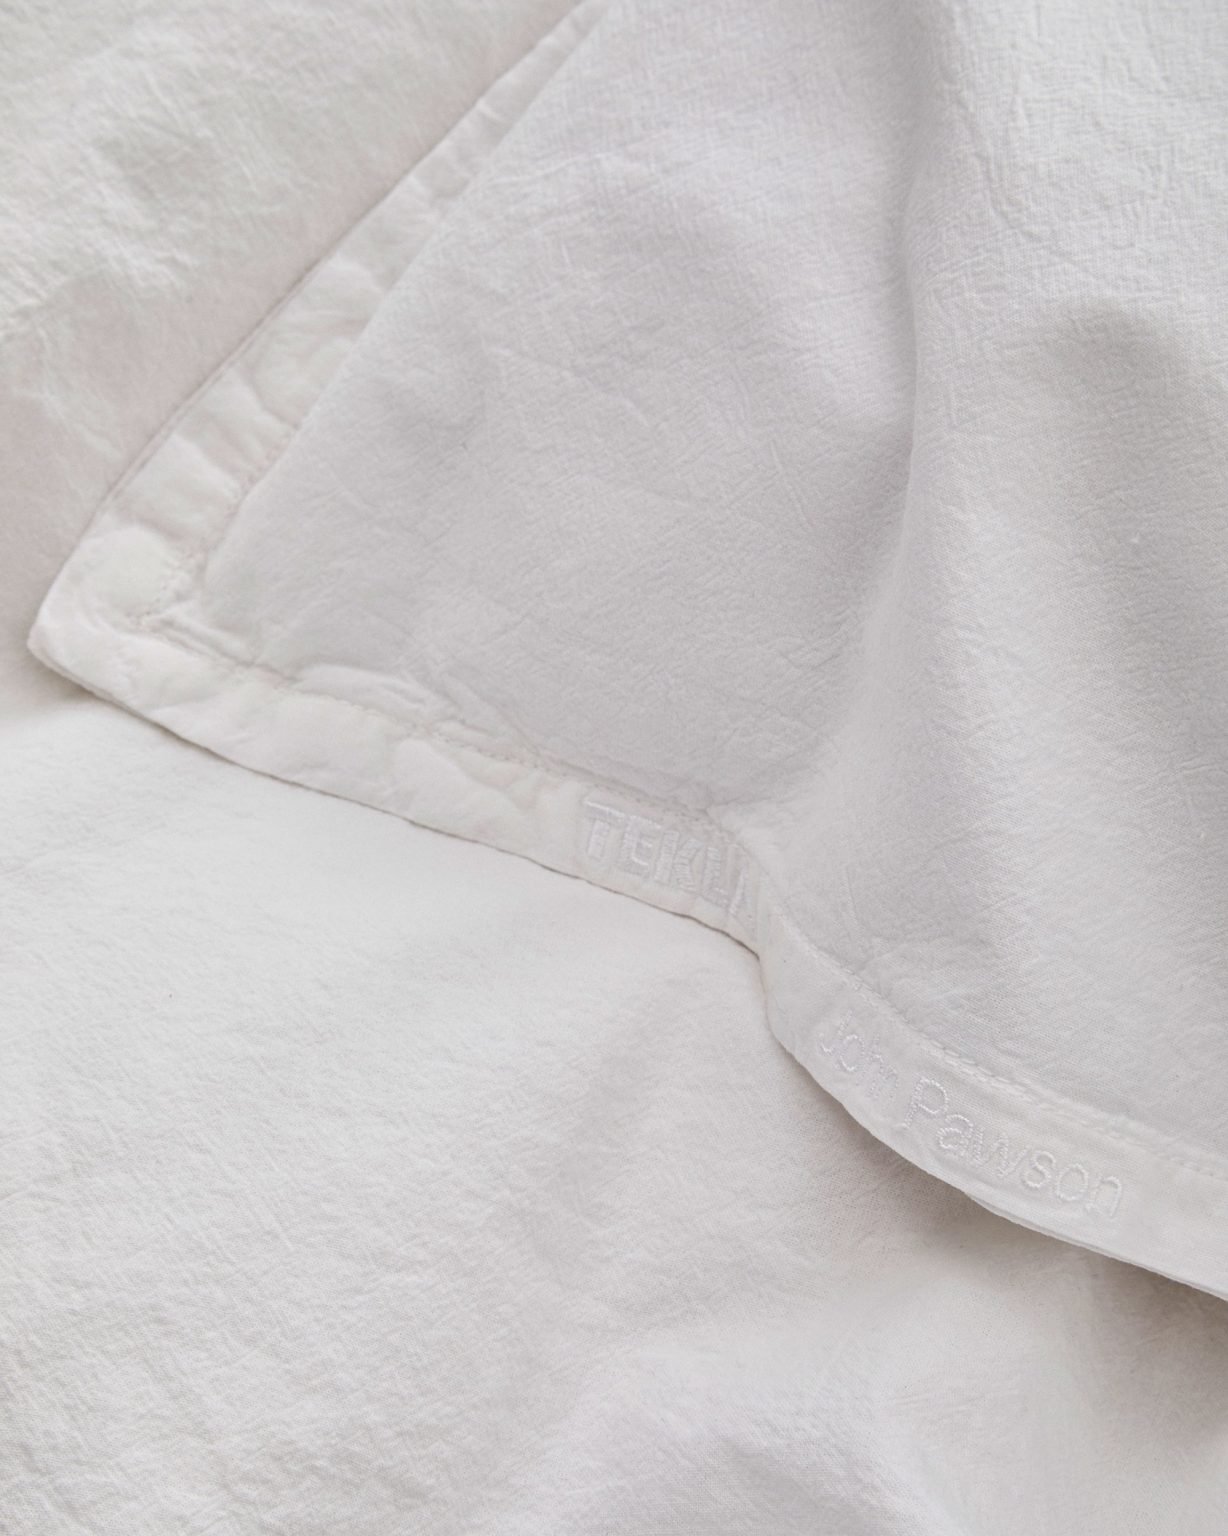 “Bed Sheets Are Imbued with Meaning”: Architect John Pawson On ...